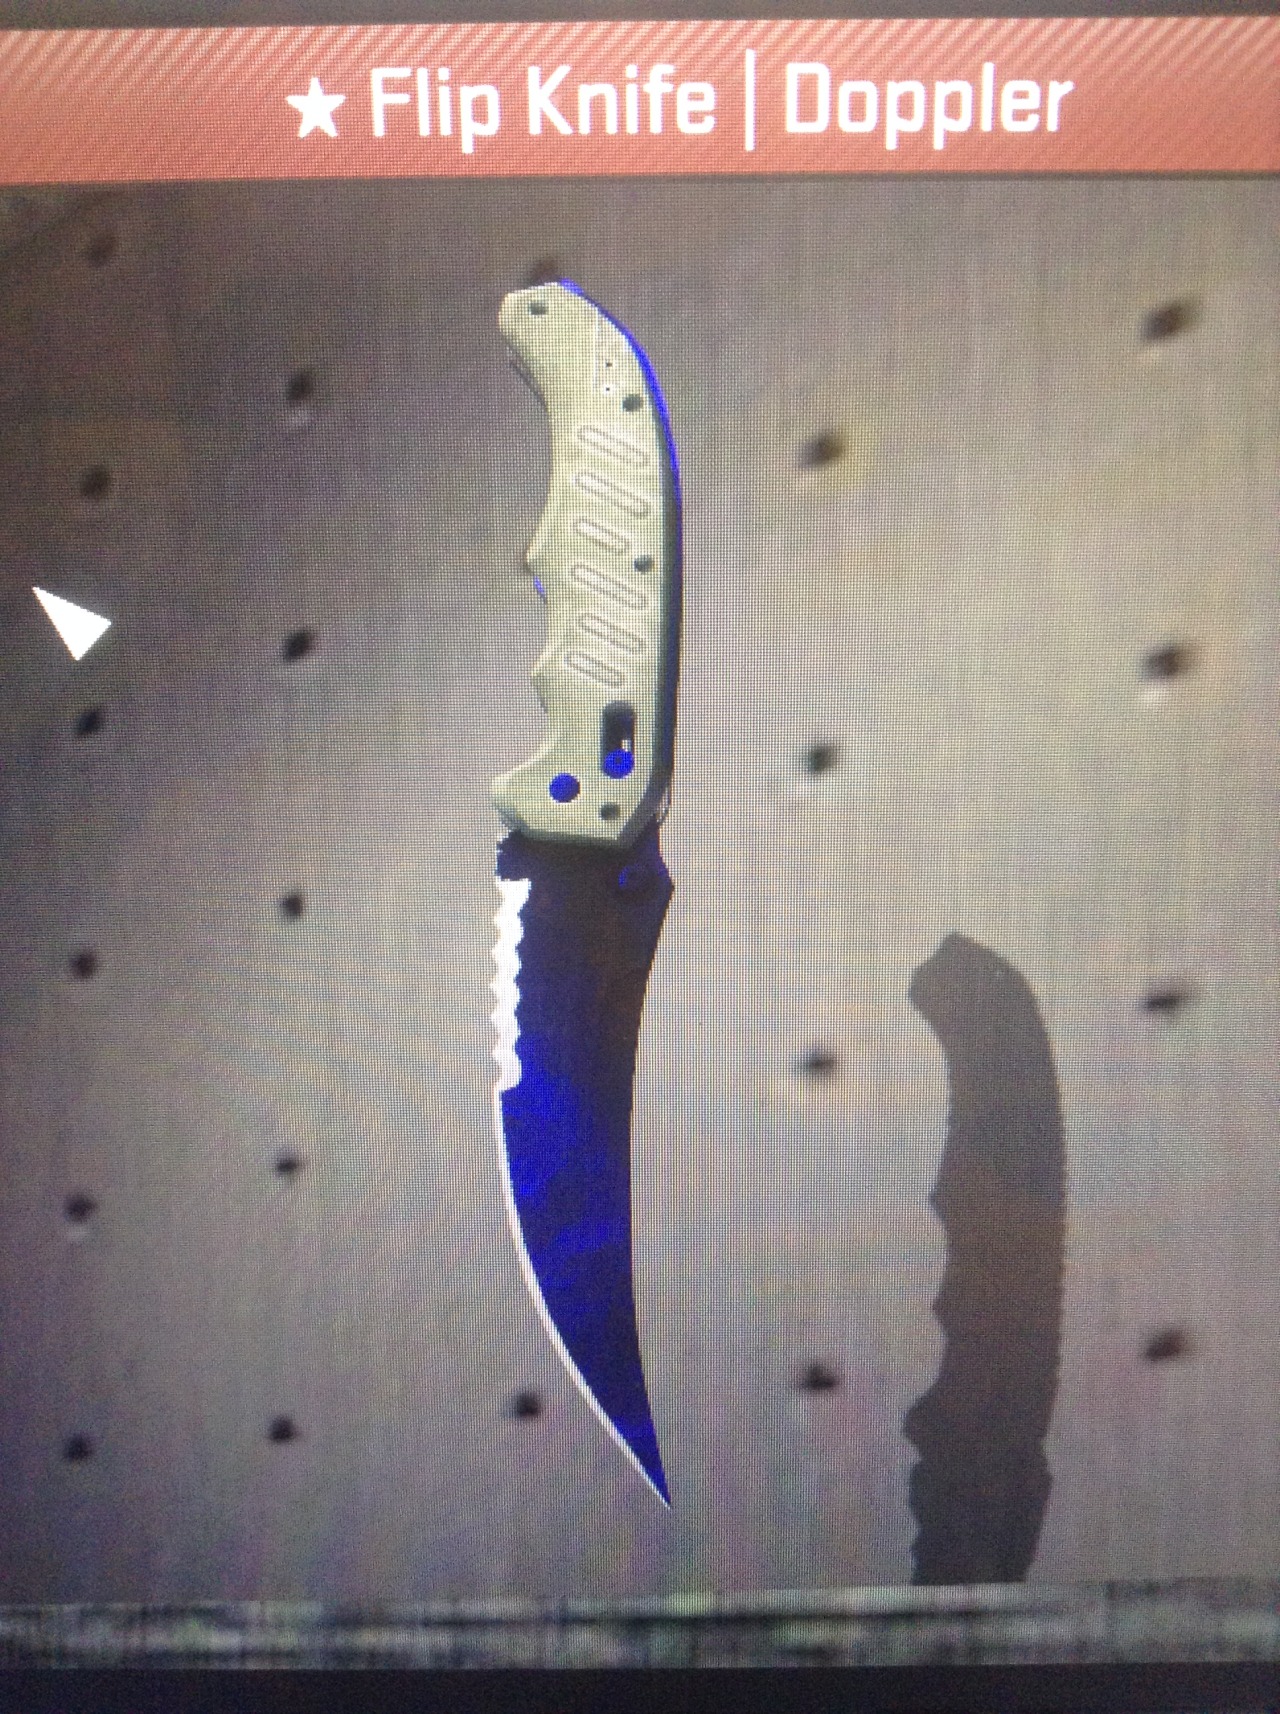 So&hellip; unboxed this today. A factory new Flip knife Doppler. I am happy. 